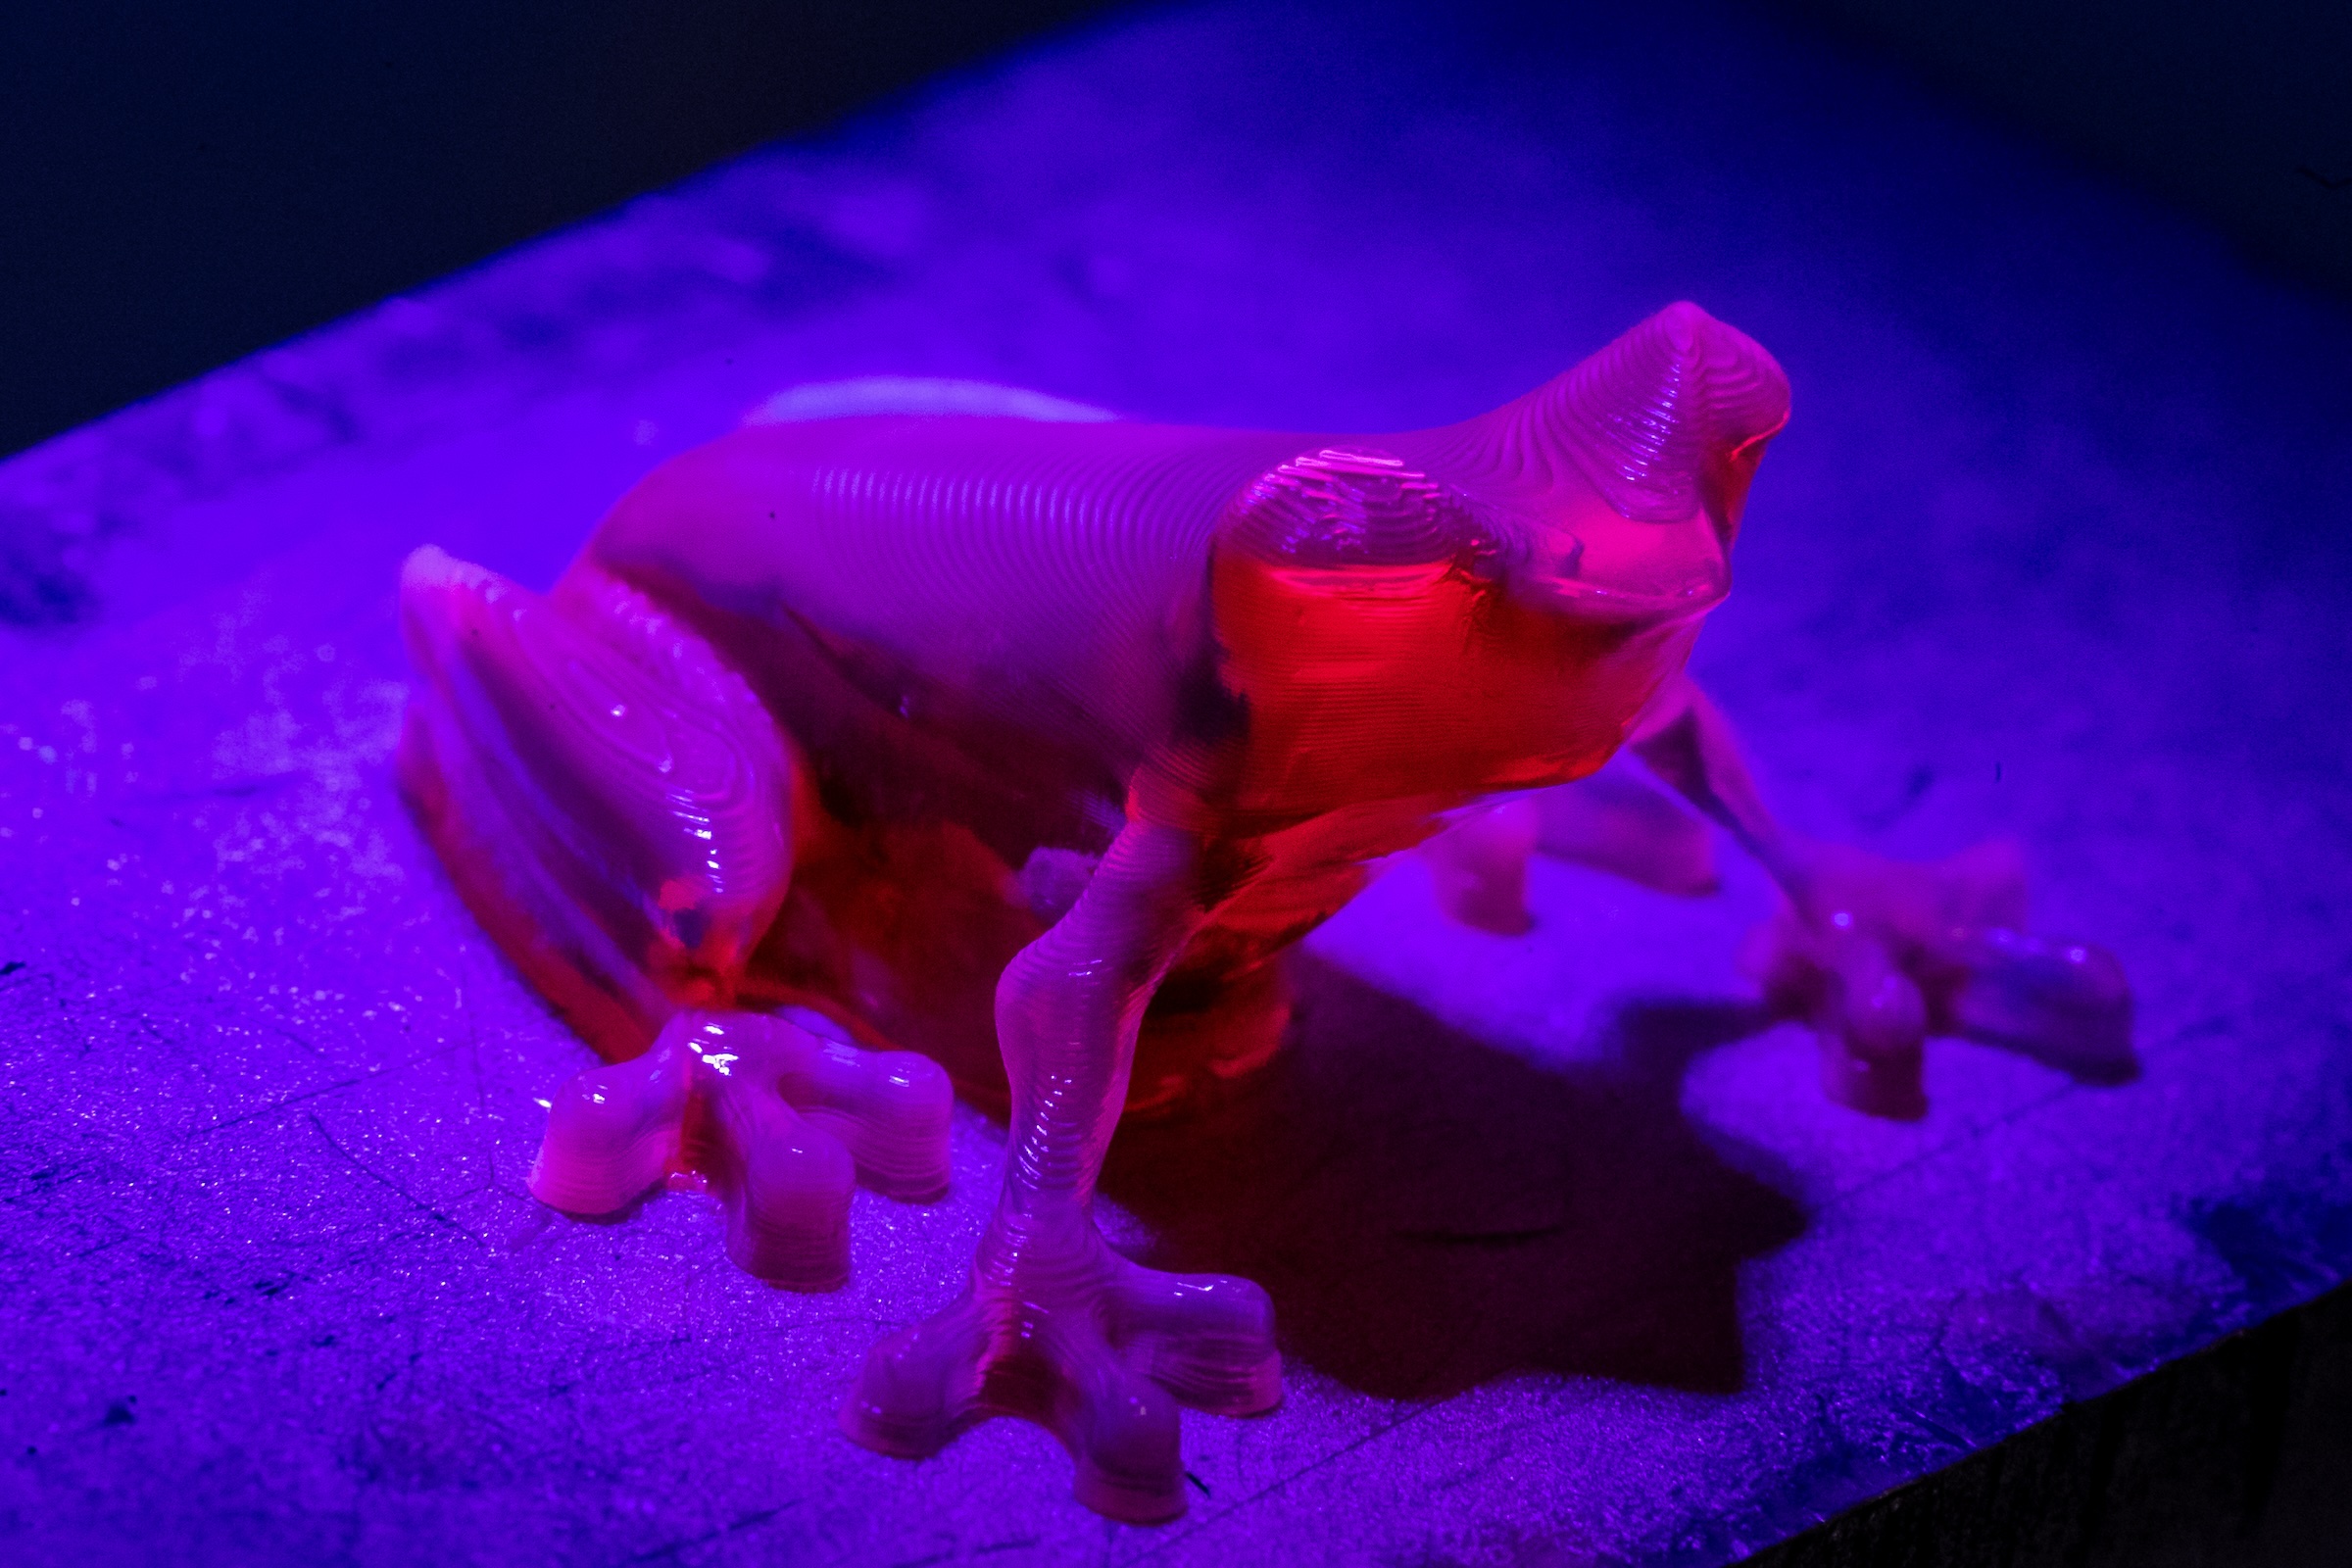 A red plastic 3D printed frog illuminated by UV light